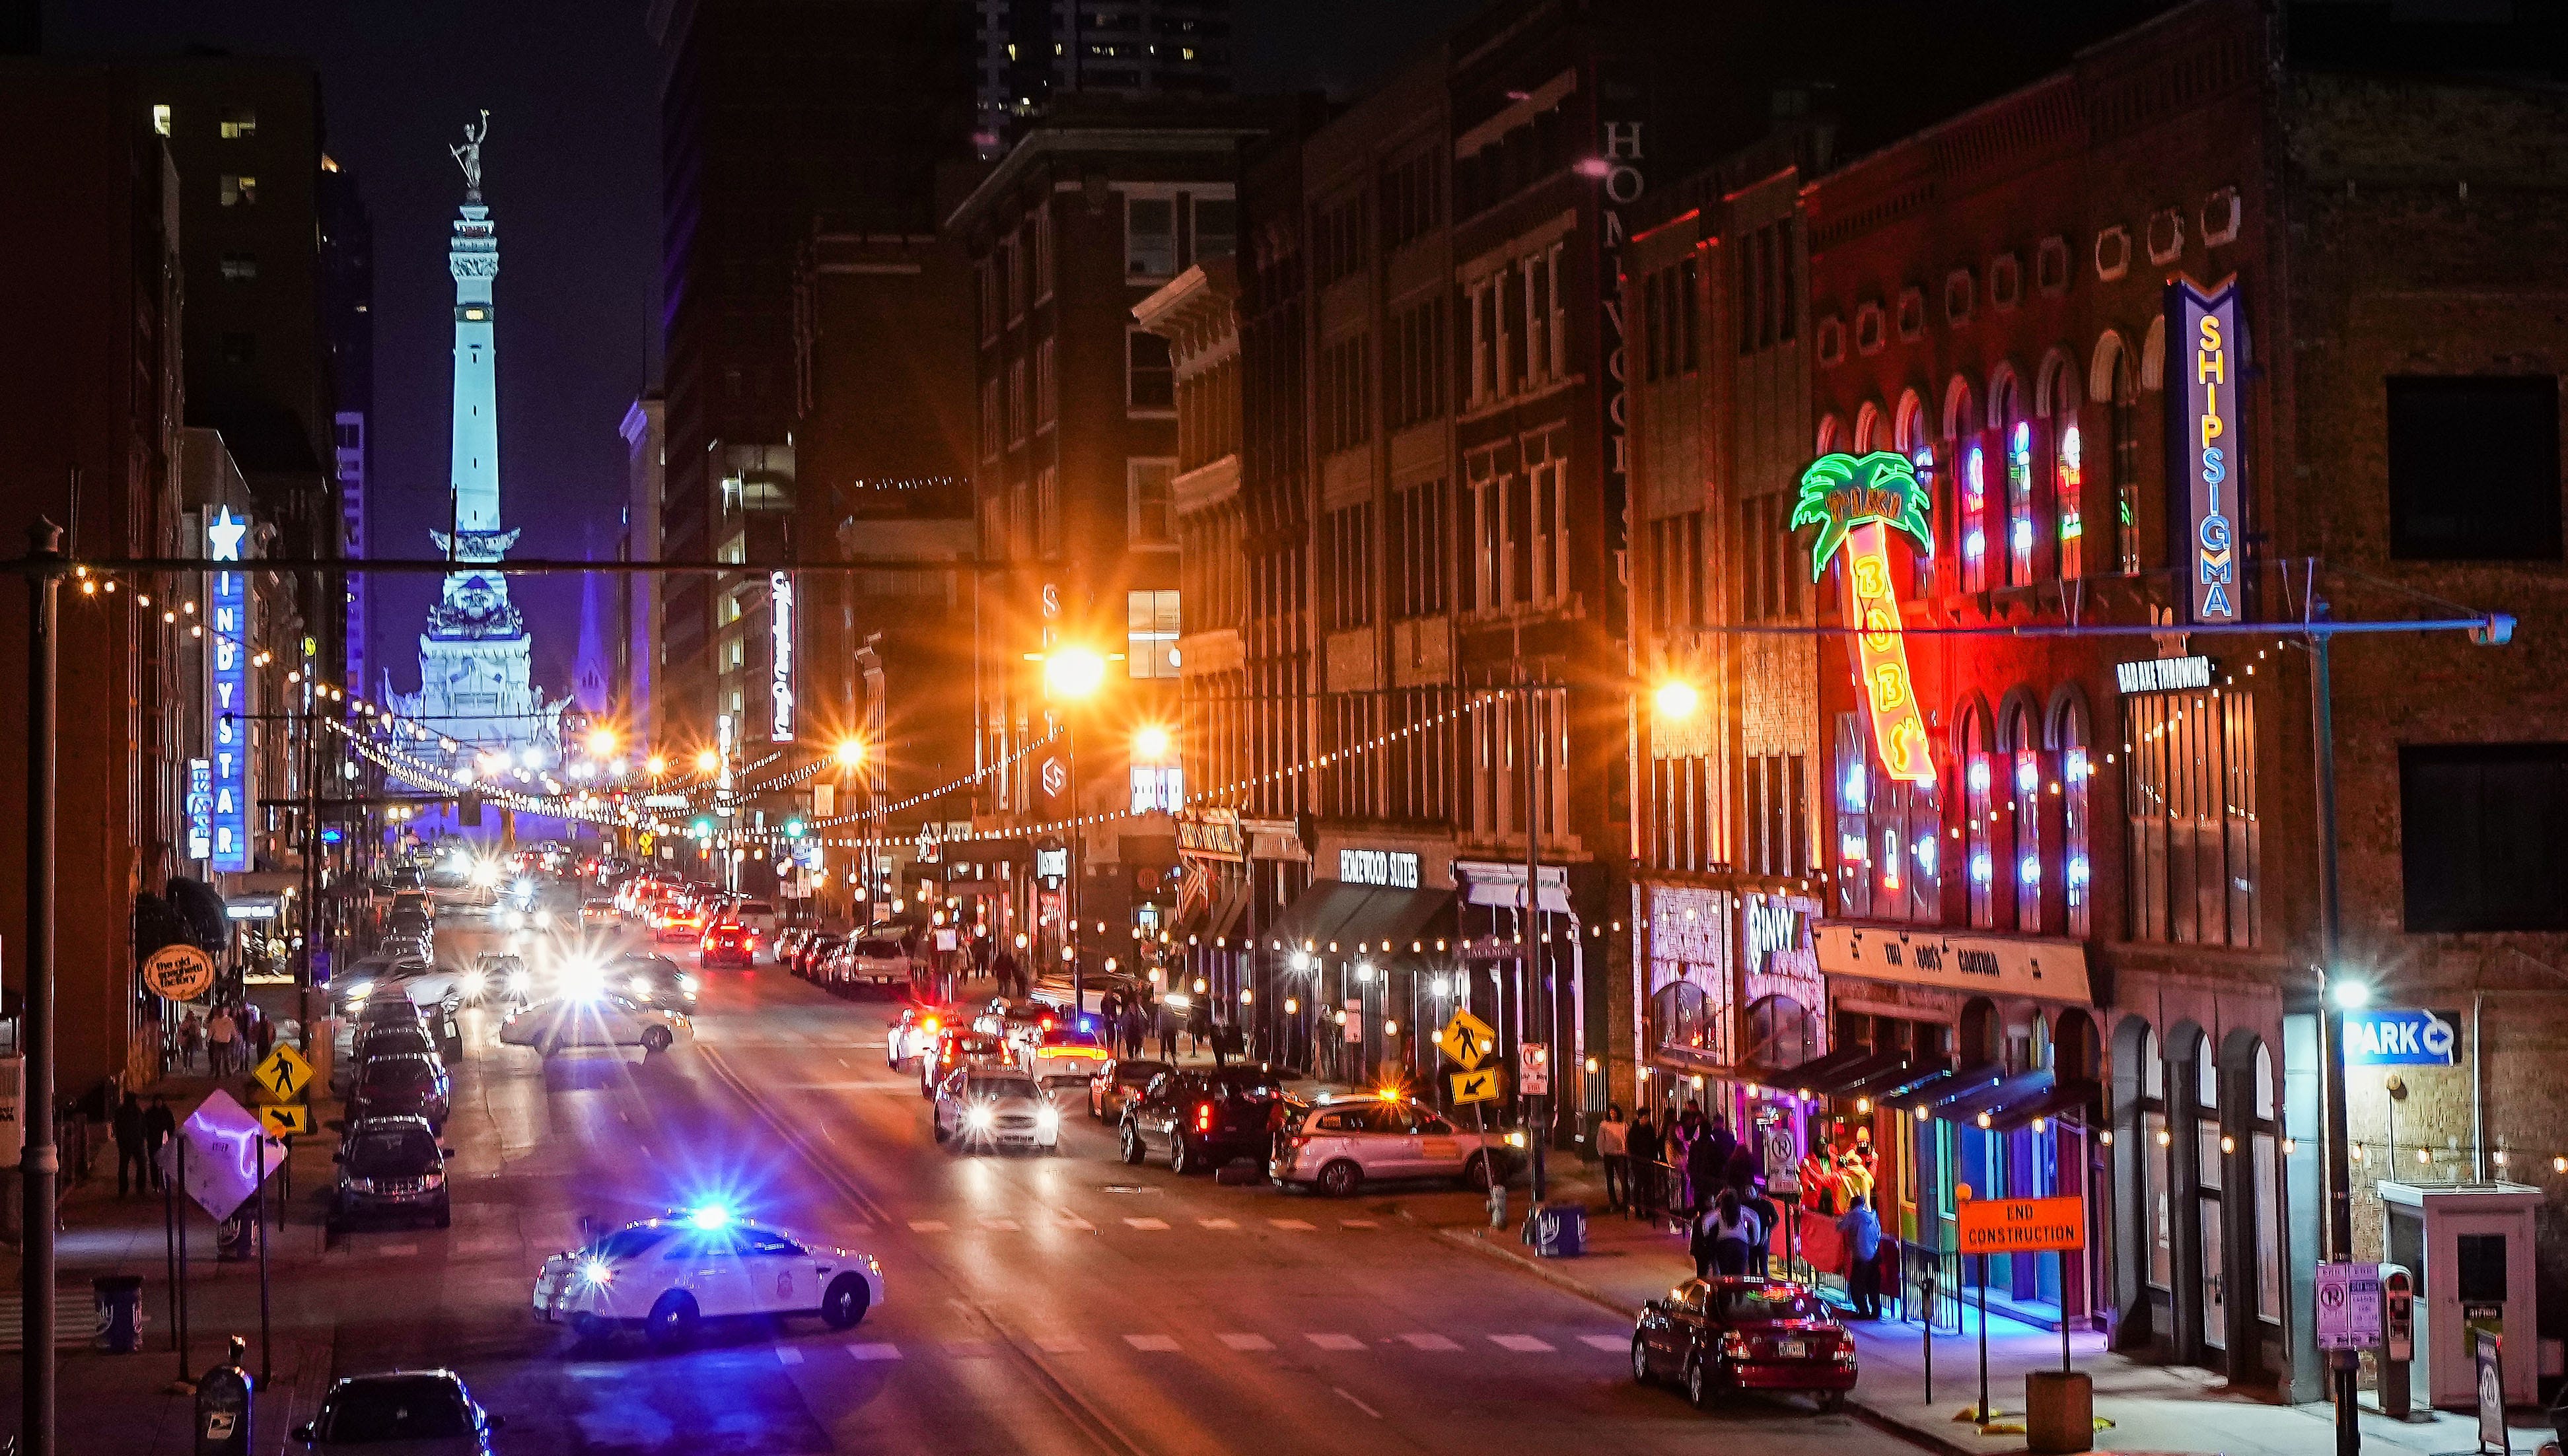 Officers sit outside of the busy bar district on South Meridian Street on a Saturday night in January. IMPD spent nearly $2.9 million on overtime from 2019 to 2022 just for extra patrols in a two-block area that is home to several bars and clubs.